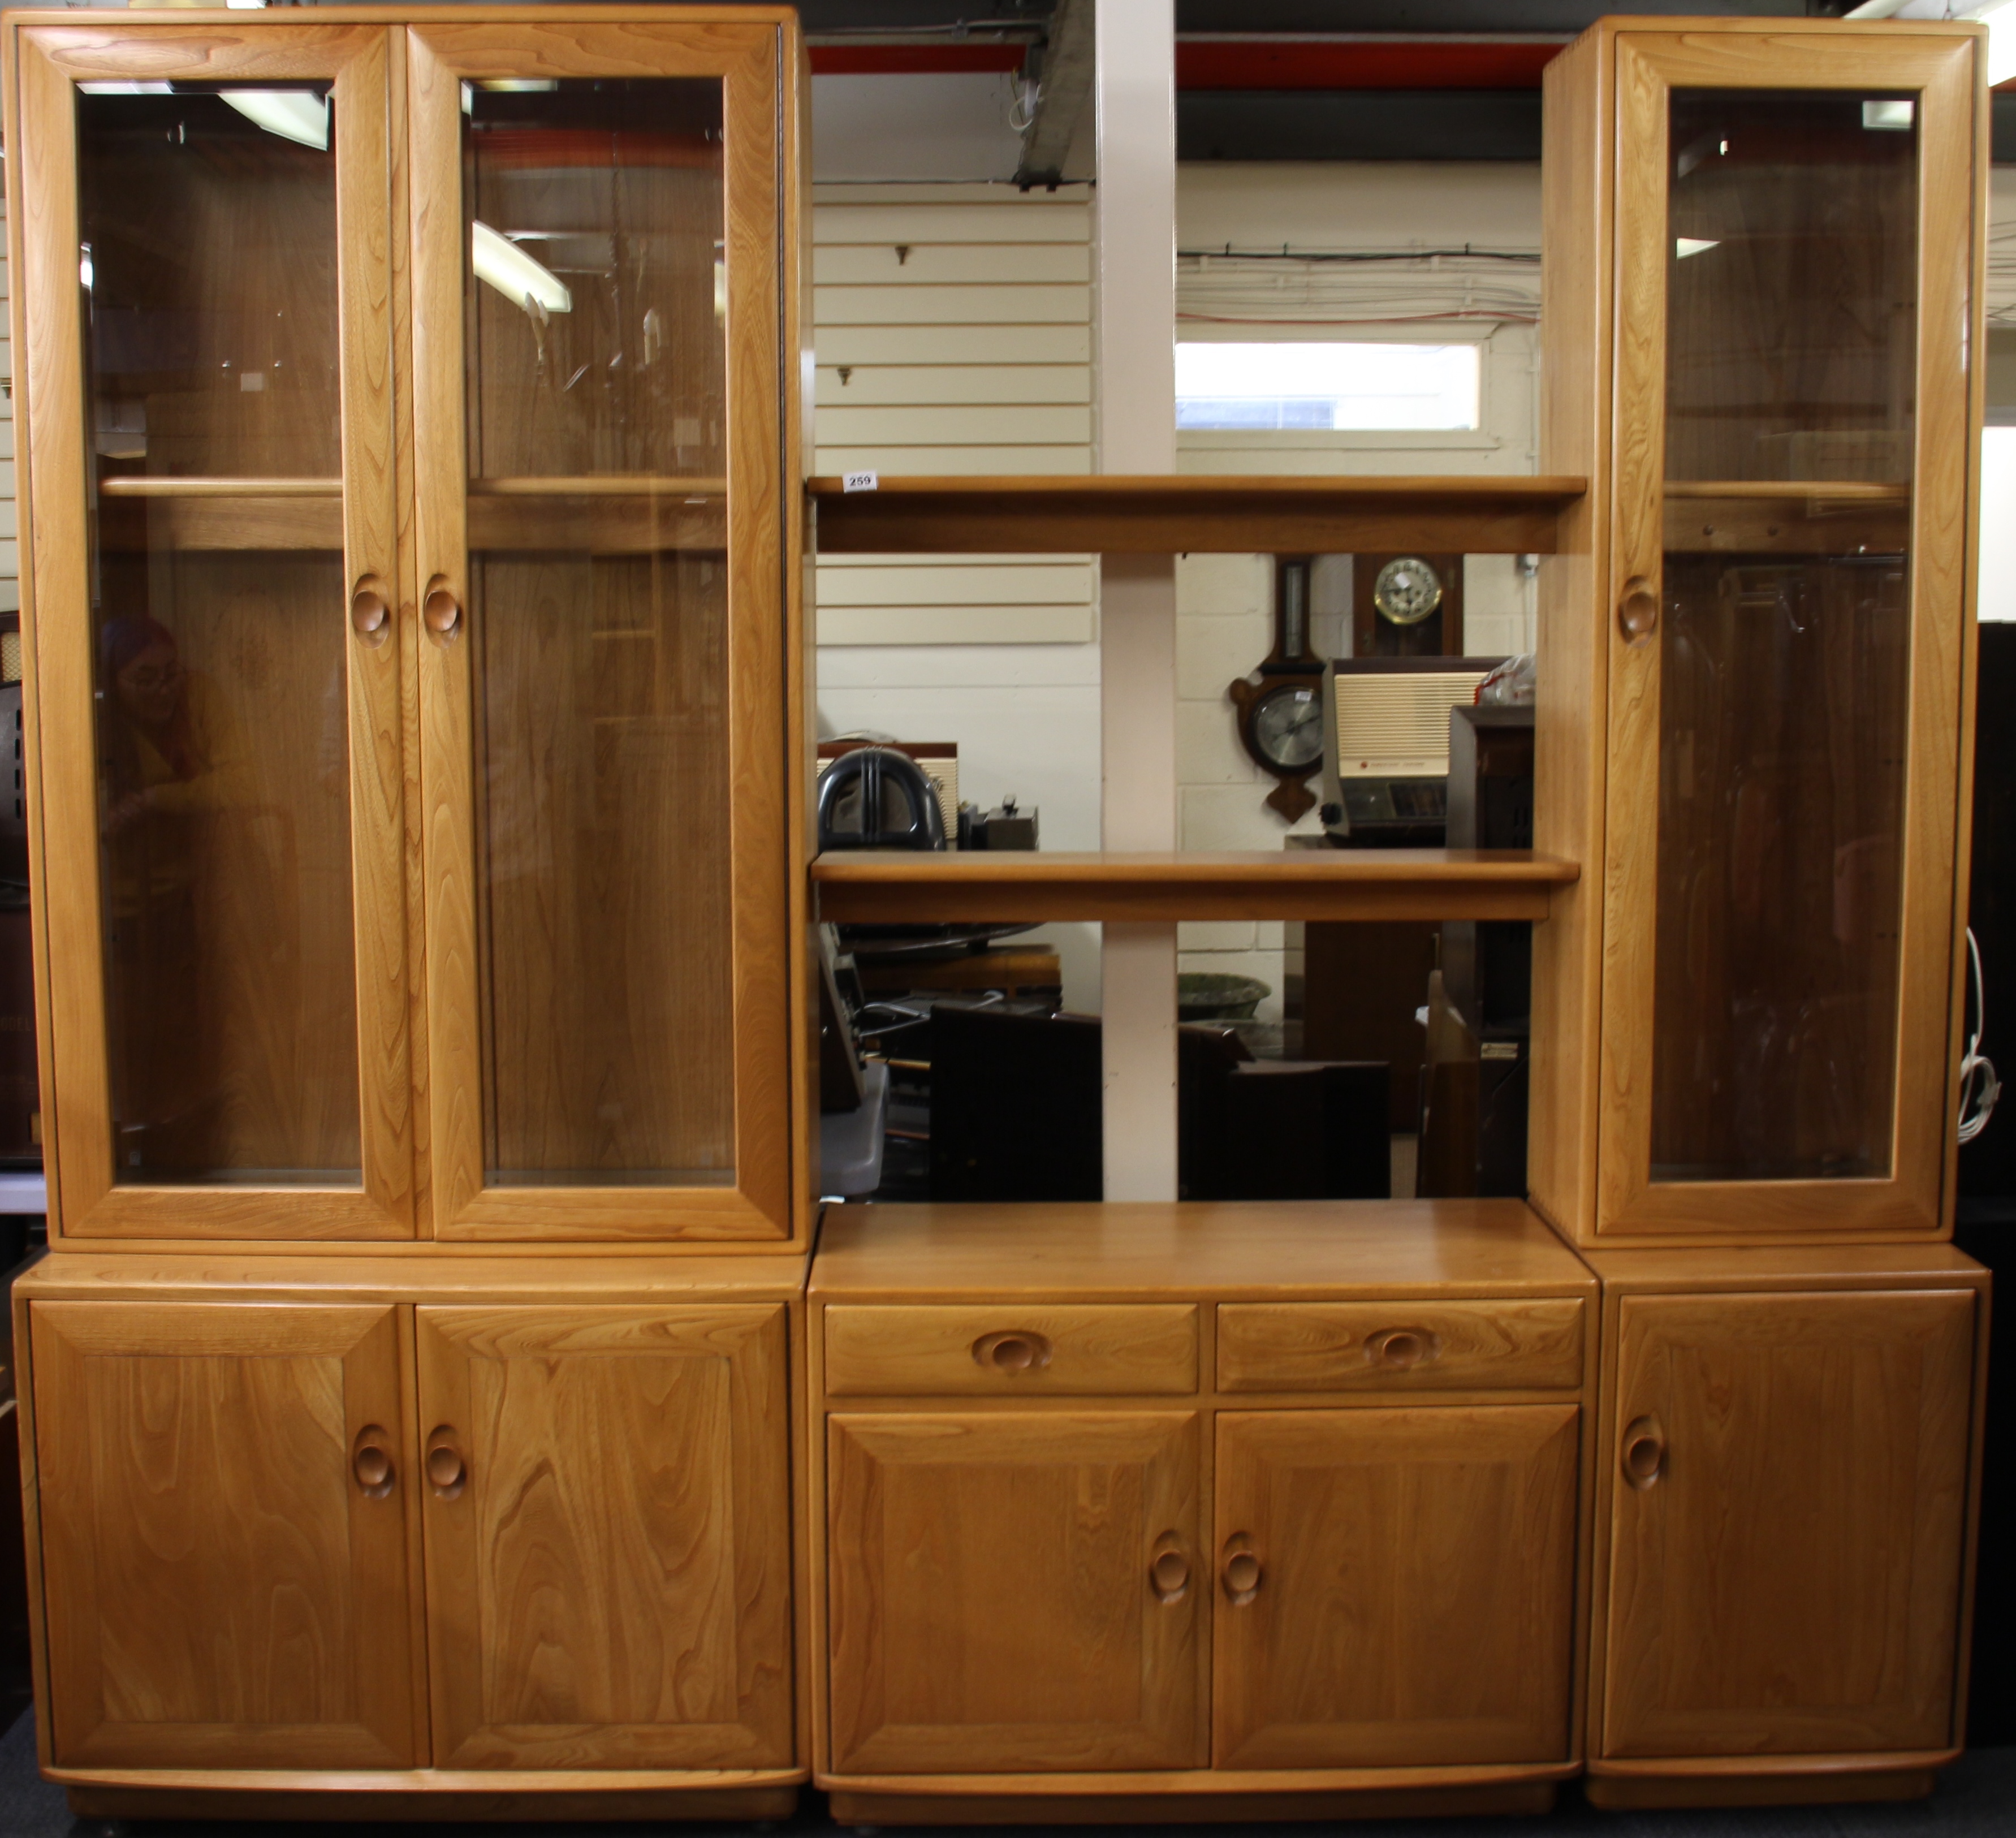 An Ercol three section glazed bookcase and display cabinet, overall W. 230cm H. 210cm.